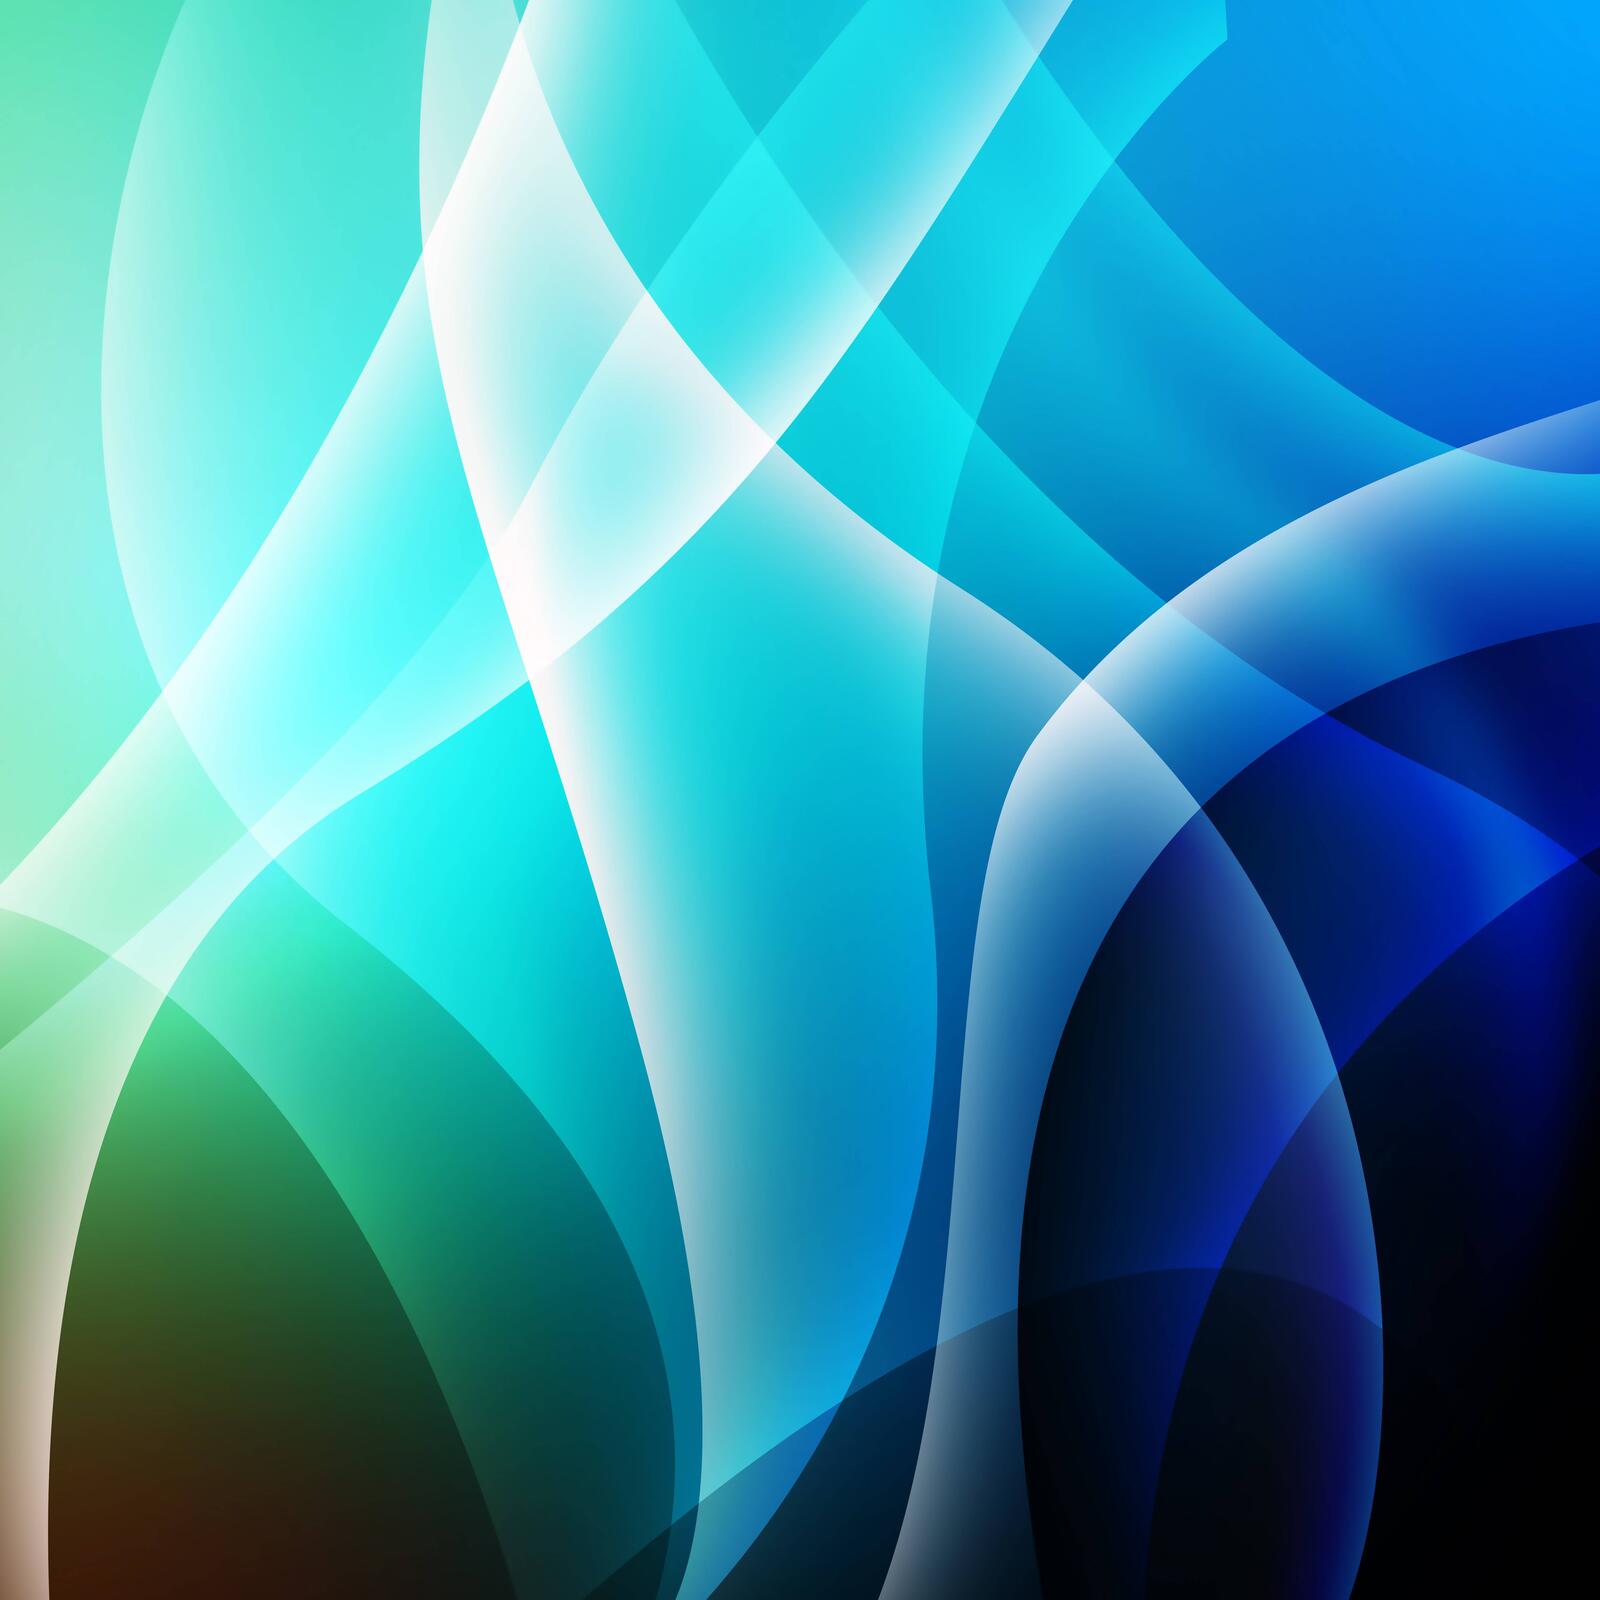 Wallpapers graphics abstraction Designer backgrounds on the desktop